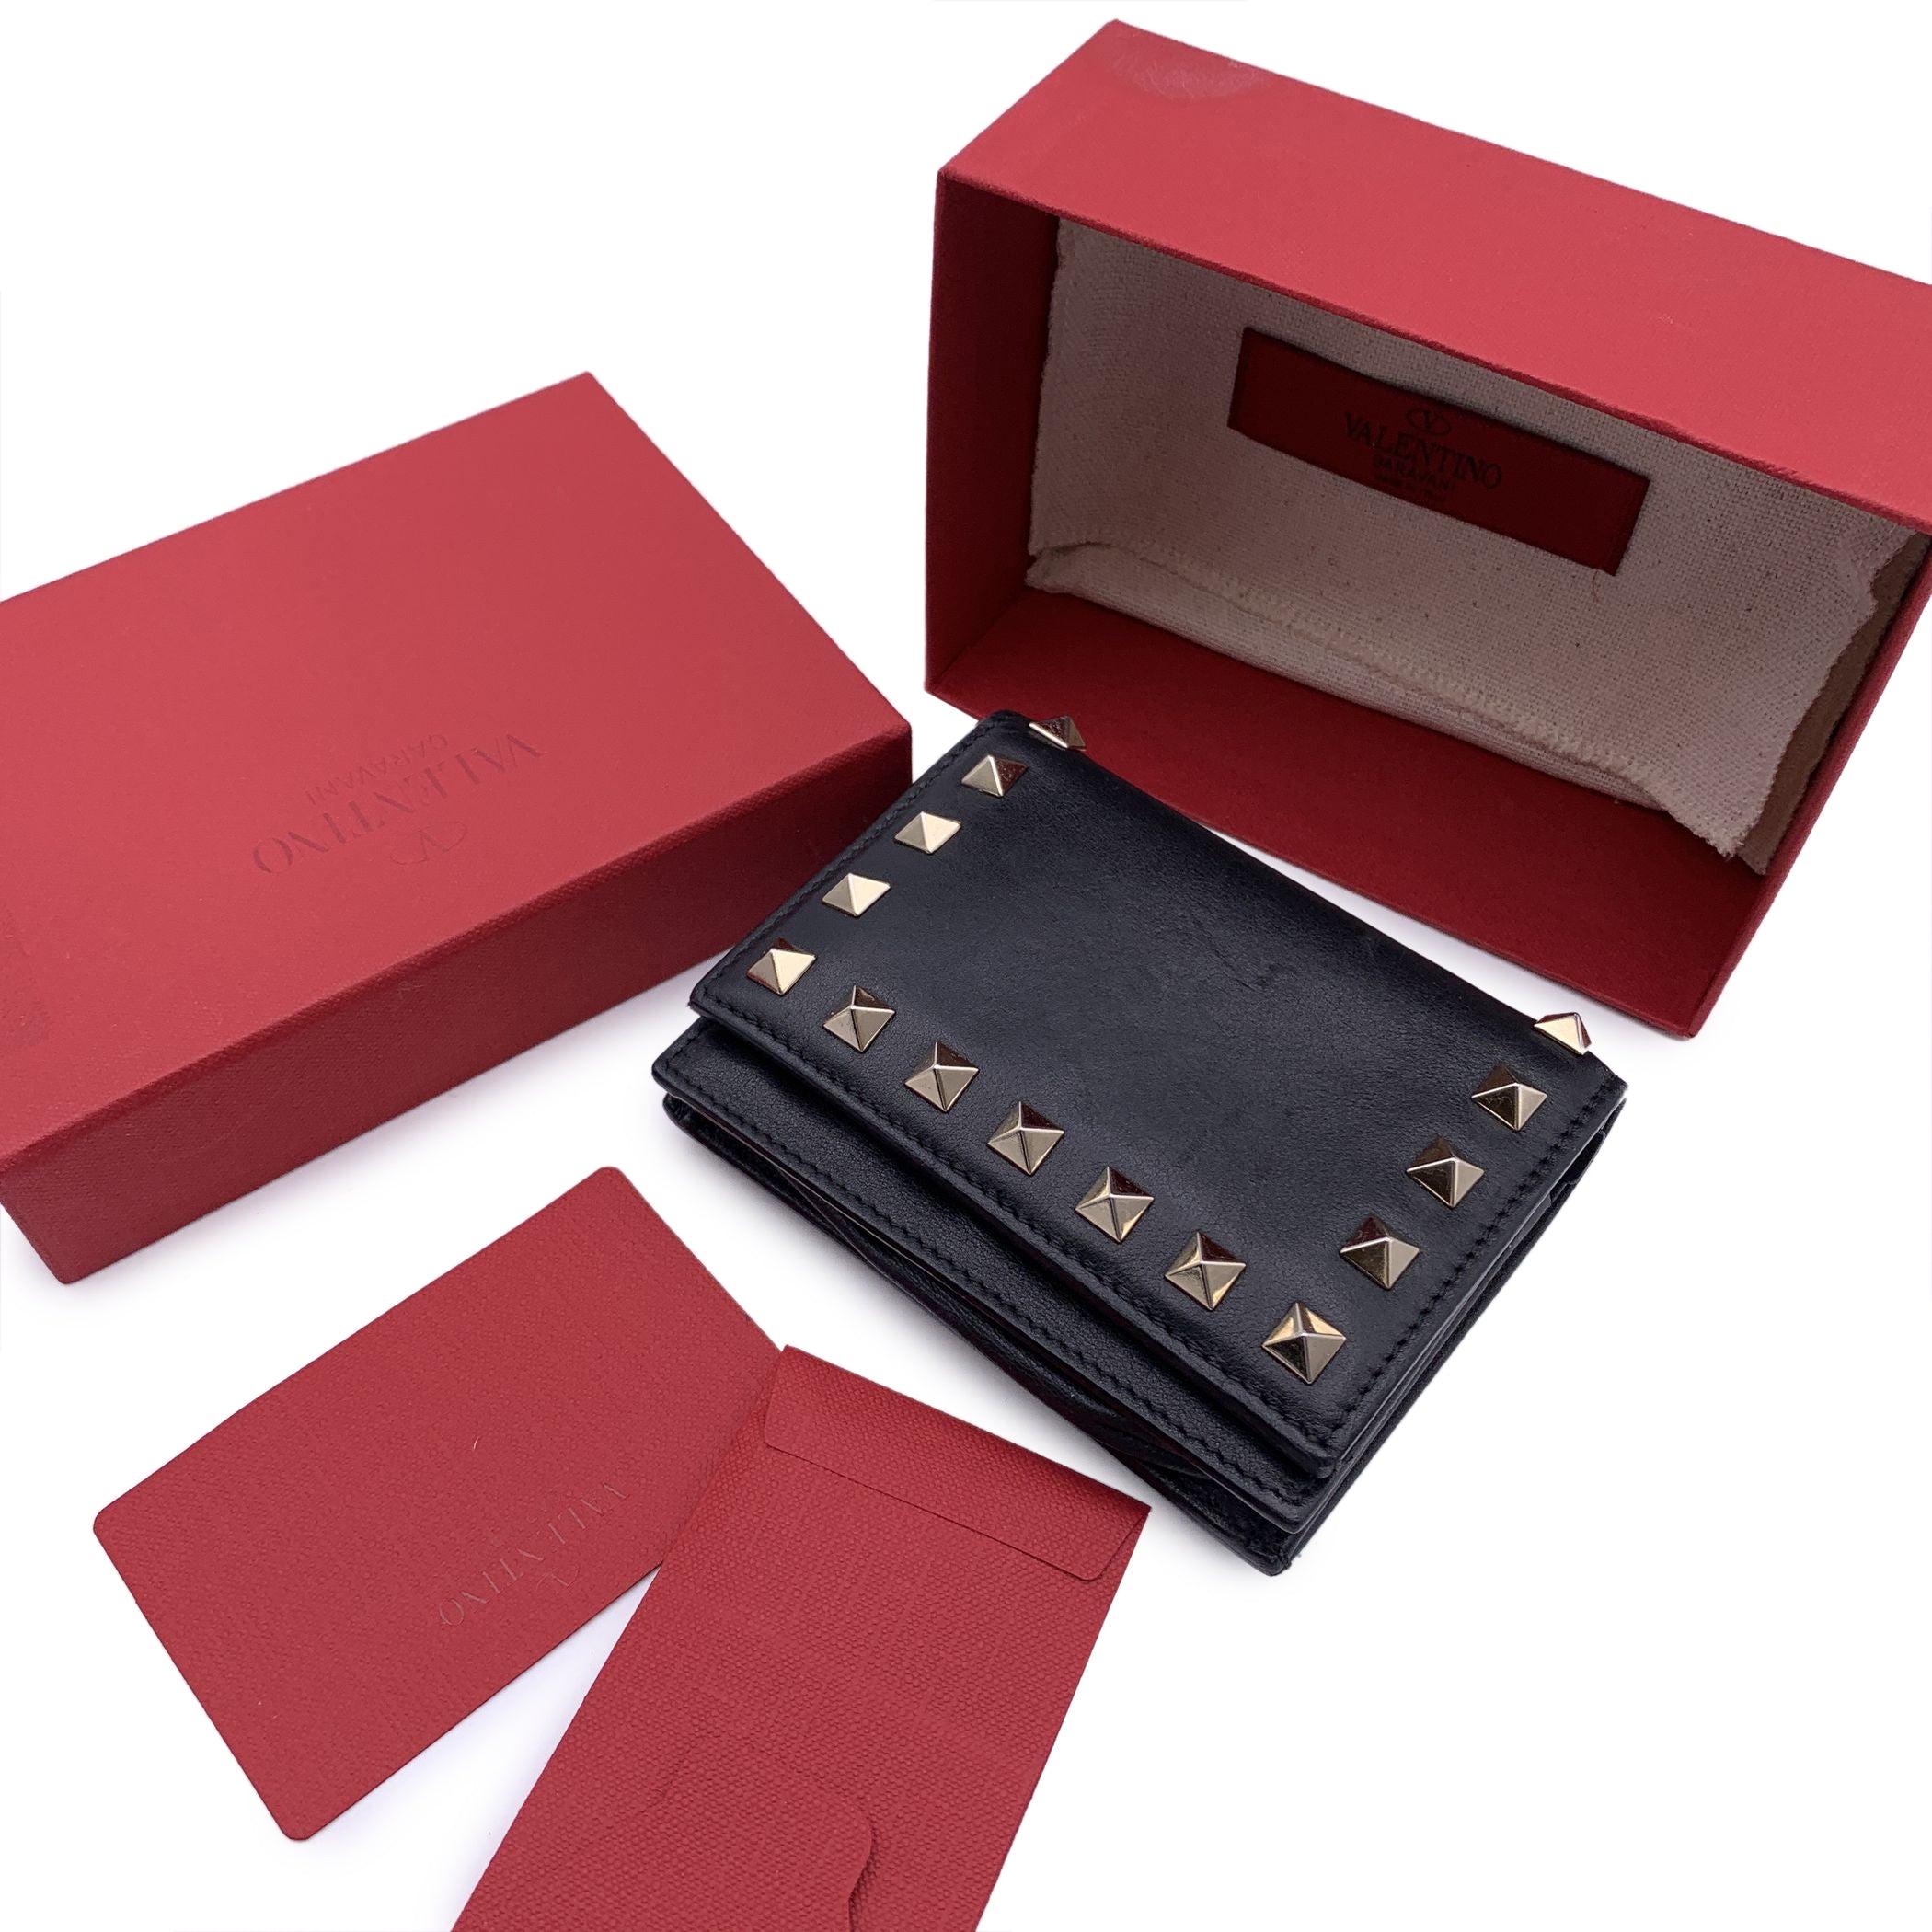 Valentino Garavani compact small compact wallet in black leather. Light gold metal pyramid studs detsialing. Logo embossed on leather on the back. Flap with button closure. Inside it has 5 credit card slots, 1 zip compsrtmante for coins and 1 bill